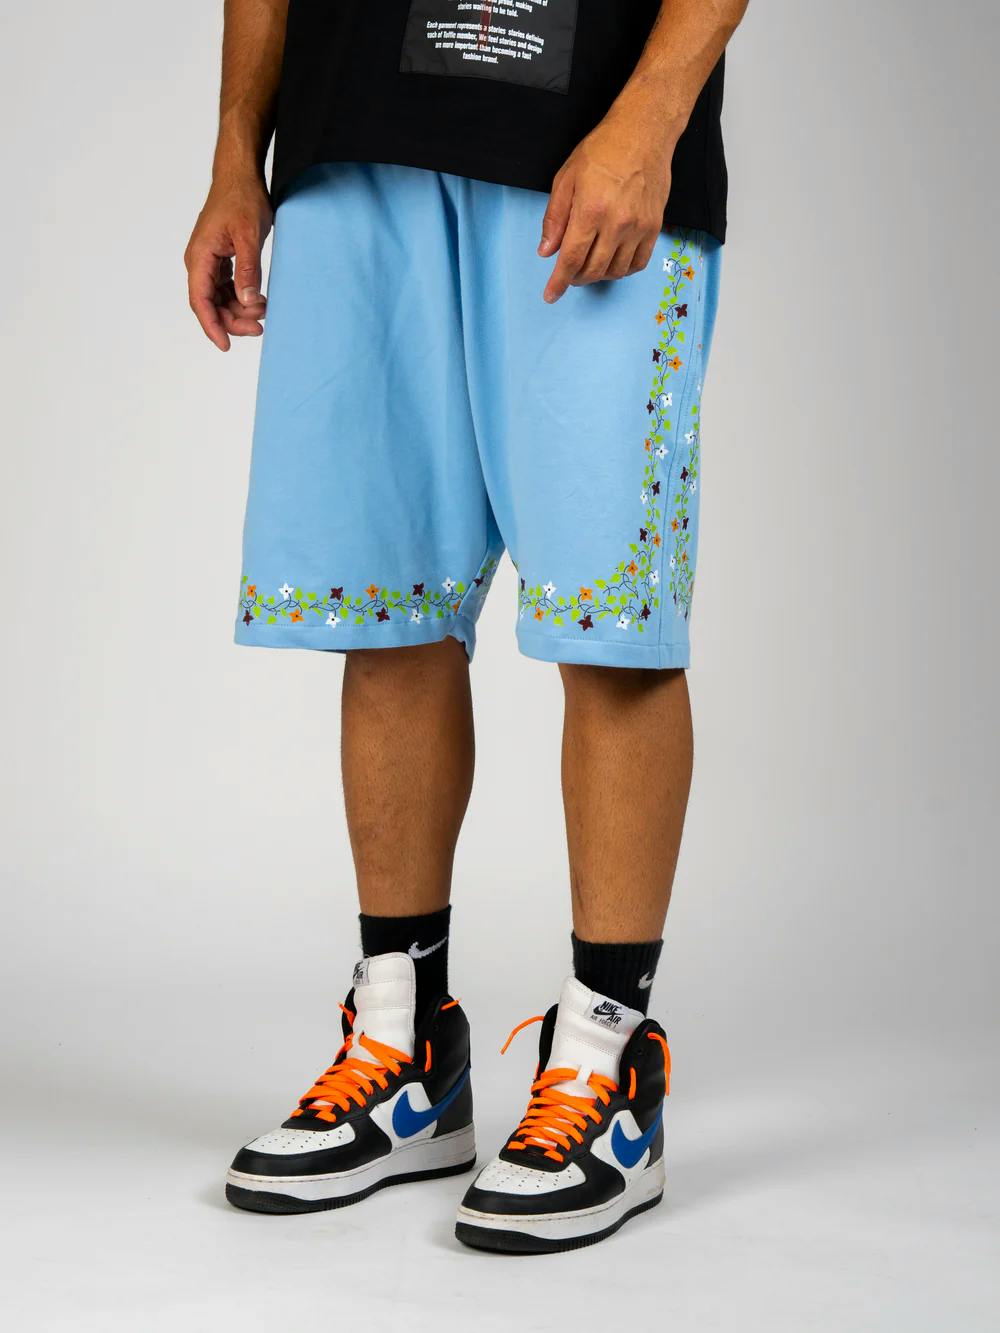 Blue Floral Shorts, a product by TOFFLE